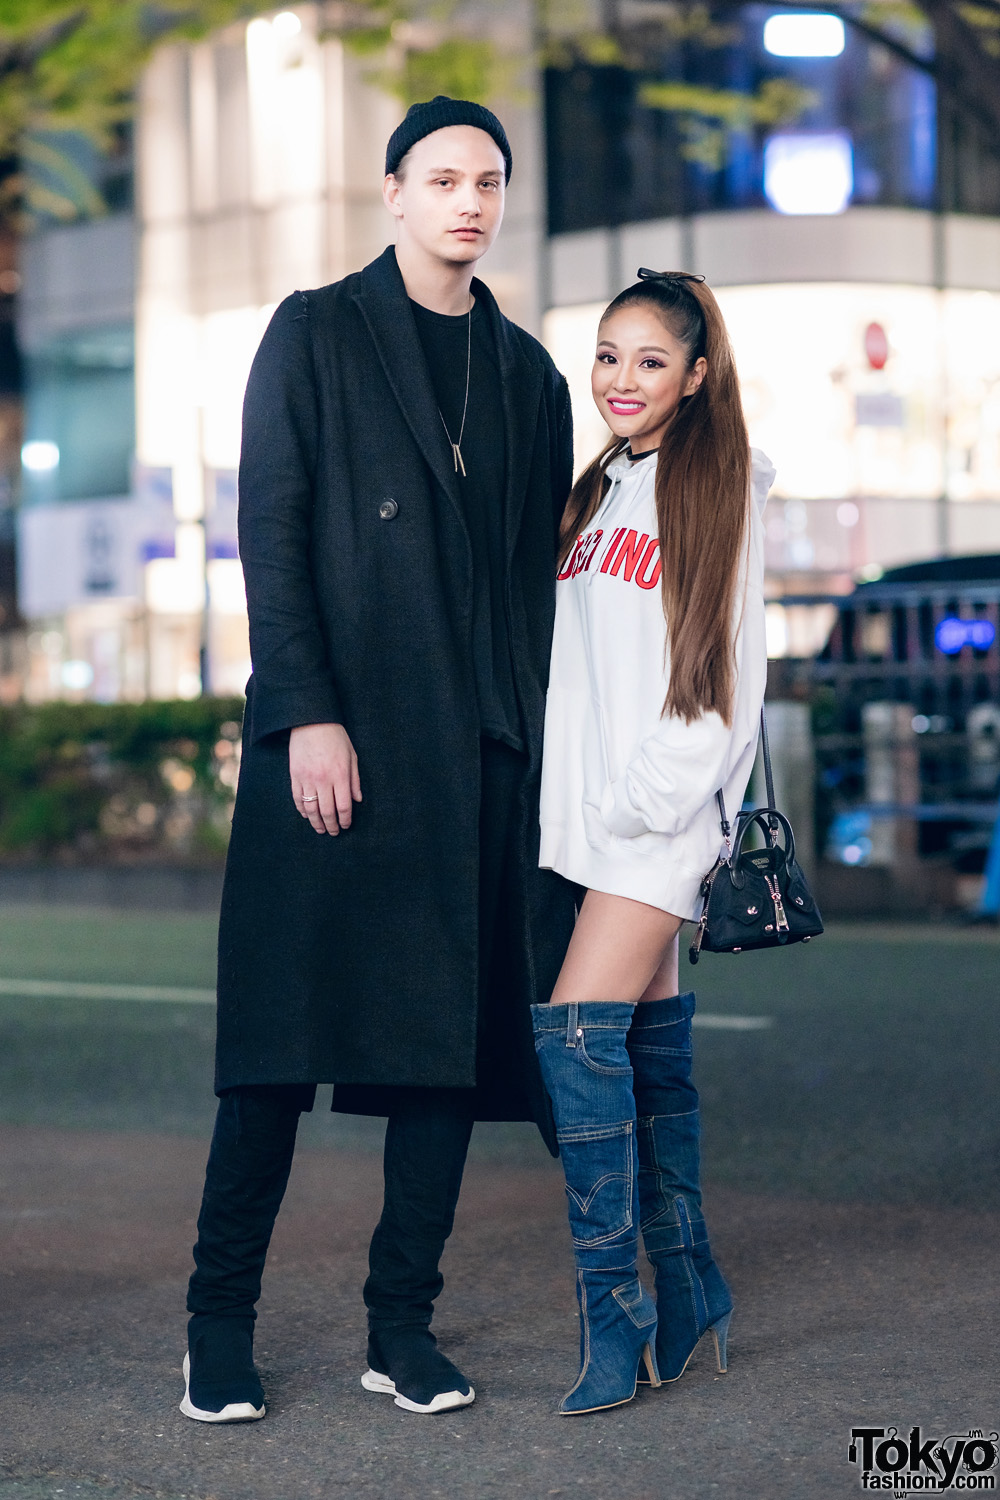 Harajuku Duo in Black & White Street Styles w/ Rick Owens, Saint Laurent, Moschino x H&M, After None & Denim Knee High Boots